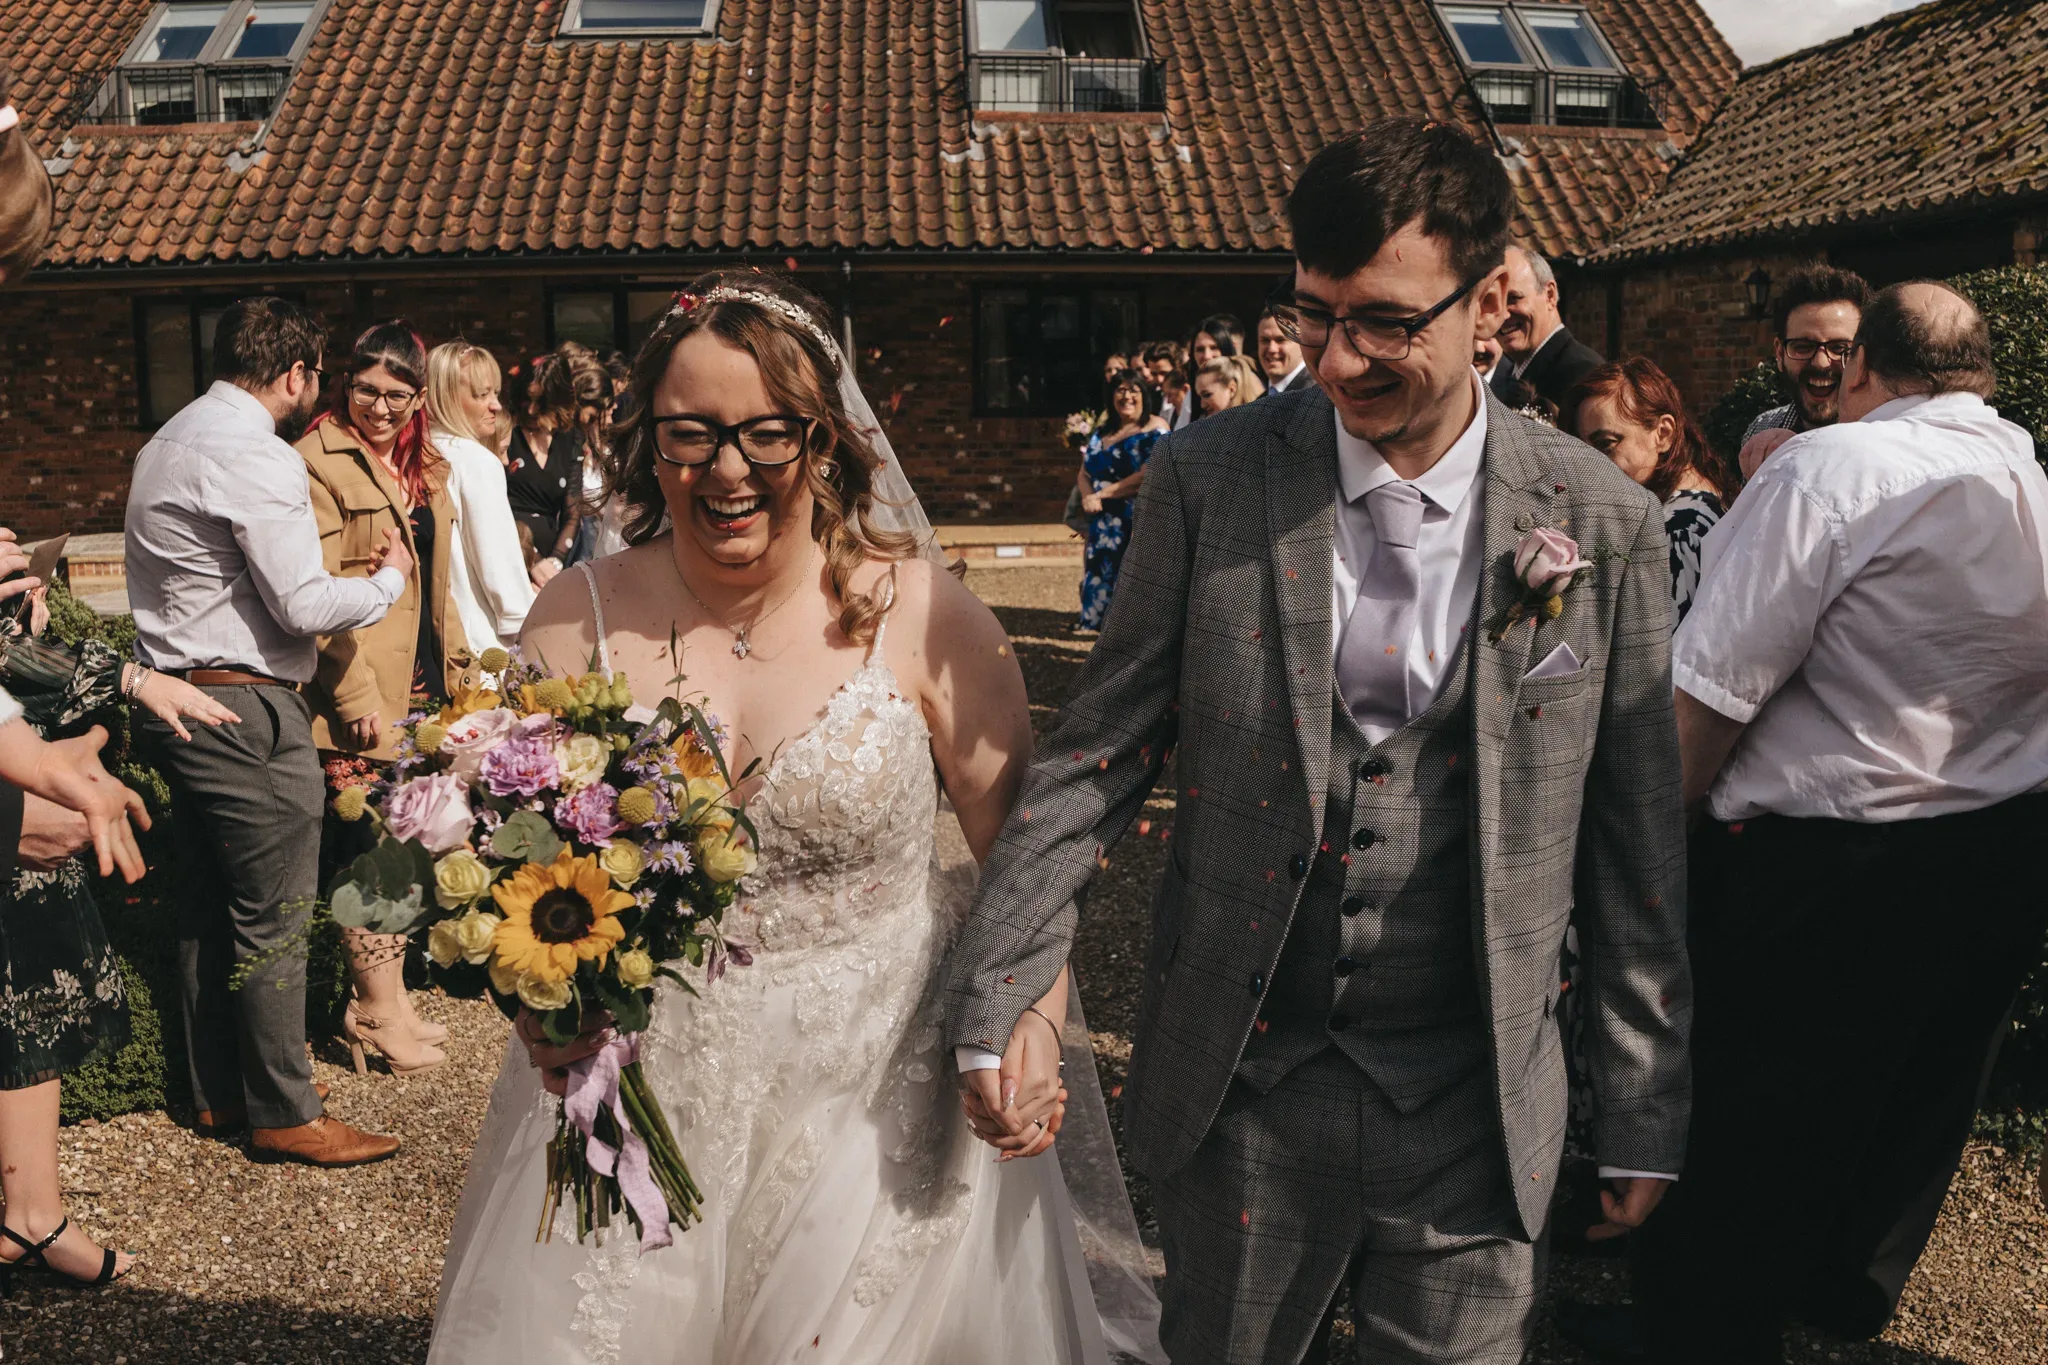 A joyful bride and groom walk hand in hand, smiling widely as they are showered with congratulations from friends and family on a sunny day with a rustic brick building in the background.